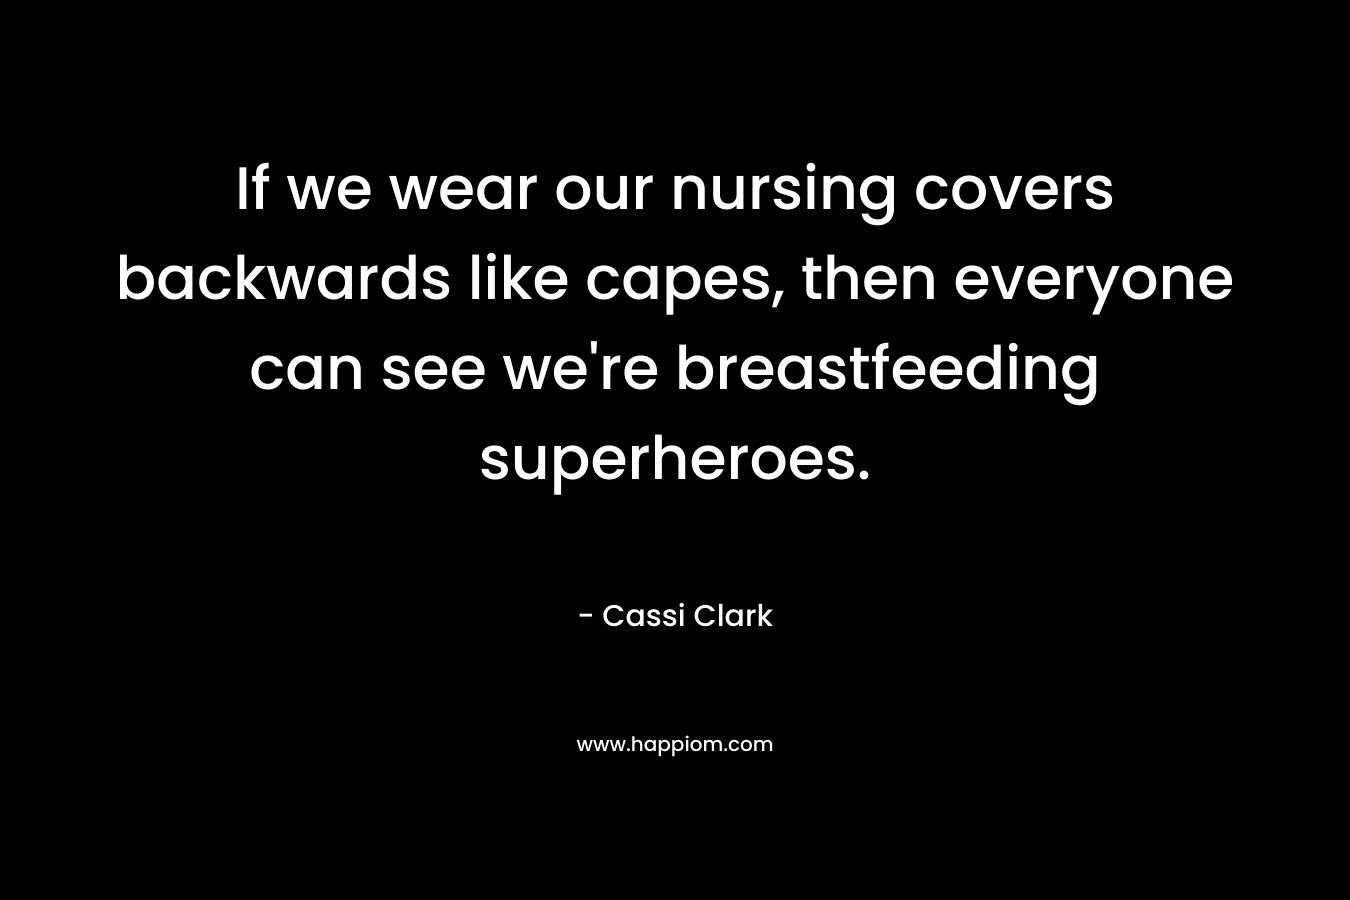 If we wear our nursing covers backwards like capes, then everyone can see we're breastfeeding superheroes.